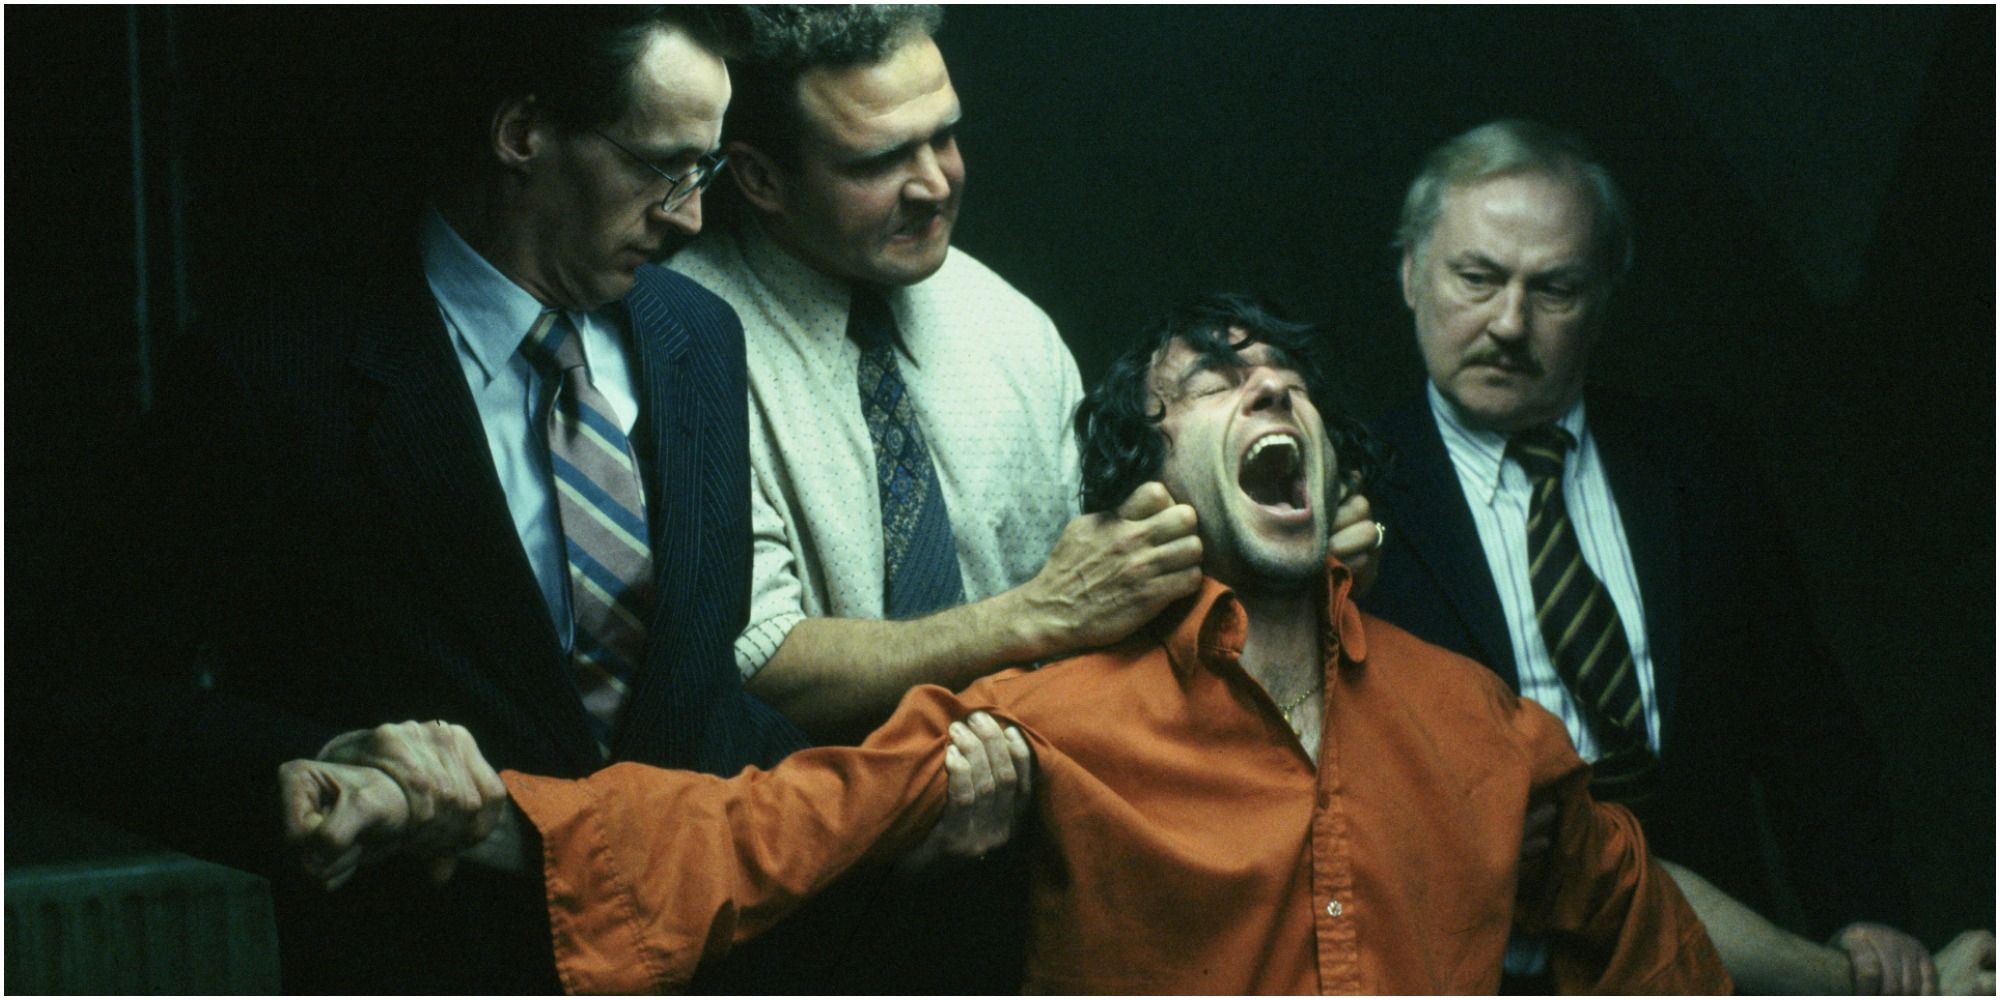 Gerry Conlon (Daniel Day-Lewis) getting tortured by prison personnel in In The Name Of The Father